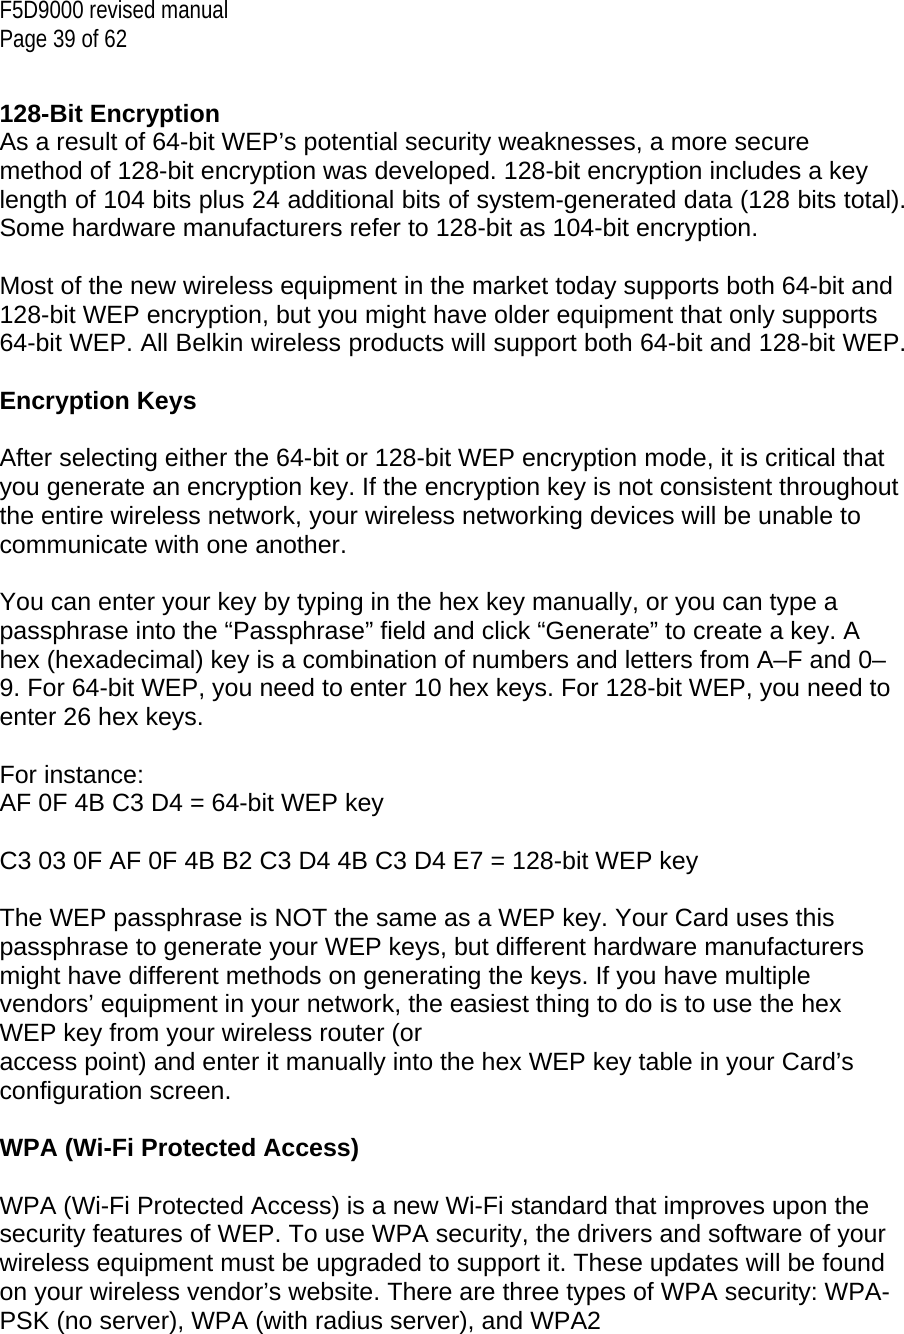 F5D9000 revised manual Page 39 of 62   128-Bit Encryption As a result of 64-bit WEP’s potential security weaknesses, a more secure method of 128-bit encryption was developed. 128-bit encryption includes a key length of 104 bits plus 24 additional bits of system-generated data (128 bits total). Some hardware manufacturers refer to 128-bit as 104-bit encryption.  Most of the new wireless equipment in the market today supports both 64-bit and 128-bit WEP encryption, but you might have older equipment that only supports 64-bit WEP. All Belkin wireless products will support both 64-bit and 128-bit WEP.  Encryption Keys  After selecting either the 64-bit or 128-bit WEP encryption mode, it is critical that you generate an encryption key. If the encryption key is not consistent throughout the entire wireless network, your wireless networking devices will be unable to communicate with one another.  You can enter your key by typing in the hex key manually, or you can type a passphrase into the “Passphrase” field and click “Generate” to create a key. A hex (hexadecimal) key is a combination of numbers and letters from A–F and 0–9. For 64-bit WEP, you need to enter 10 hex keys. For 128-bit WEP, you need to enter 26 hex keys.  For instance: AF 0F 4B C3 D4 = 64-bit WEP key  C3 03 0F AF 0F 4B B2 C3 D4 4B C3 D4 E7 = 128-bit WEP key  The WEP passphrase is NOT the same as a WEP key. Your Card uses this passphrase to generate your WEP keys, but different hardware manufacturers might have different methods on generating the keys. If you have multiple vendors’ equipment in your network, the easiest thing to do is to use the hex WEP key from your wireless router (or access point) and enter it manually into the hex WEP key table in your Card’s configuration screen.  WPA (Wi-Fi Protected Access)  WPA (Wi-Fi Protected Access) is a new Wi-Fi standard that improves upon the security features of WEP. To use WPA security, the drivers and software of your wireless equipment must be upgraded to support it. These updates will be found on your wireless vendor’s website. There are three types of WPA security: WPA-PSK (no server), WPA (with radius server), and WPA2  